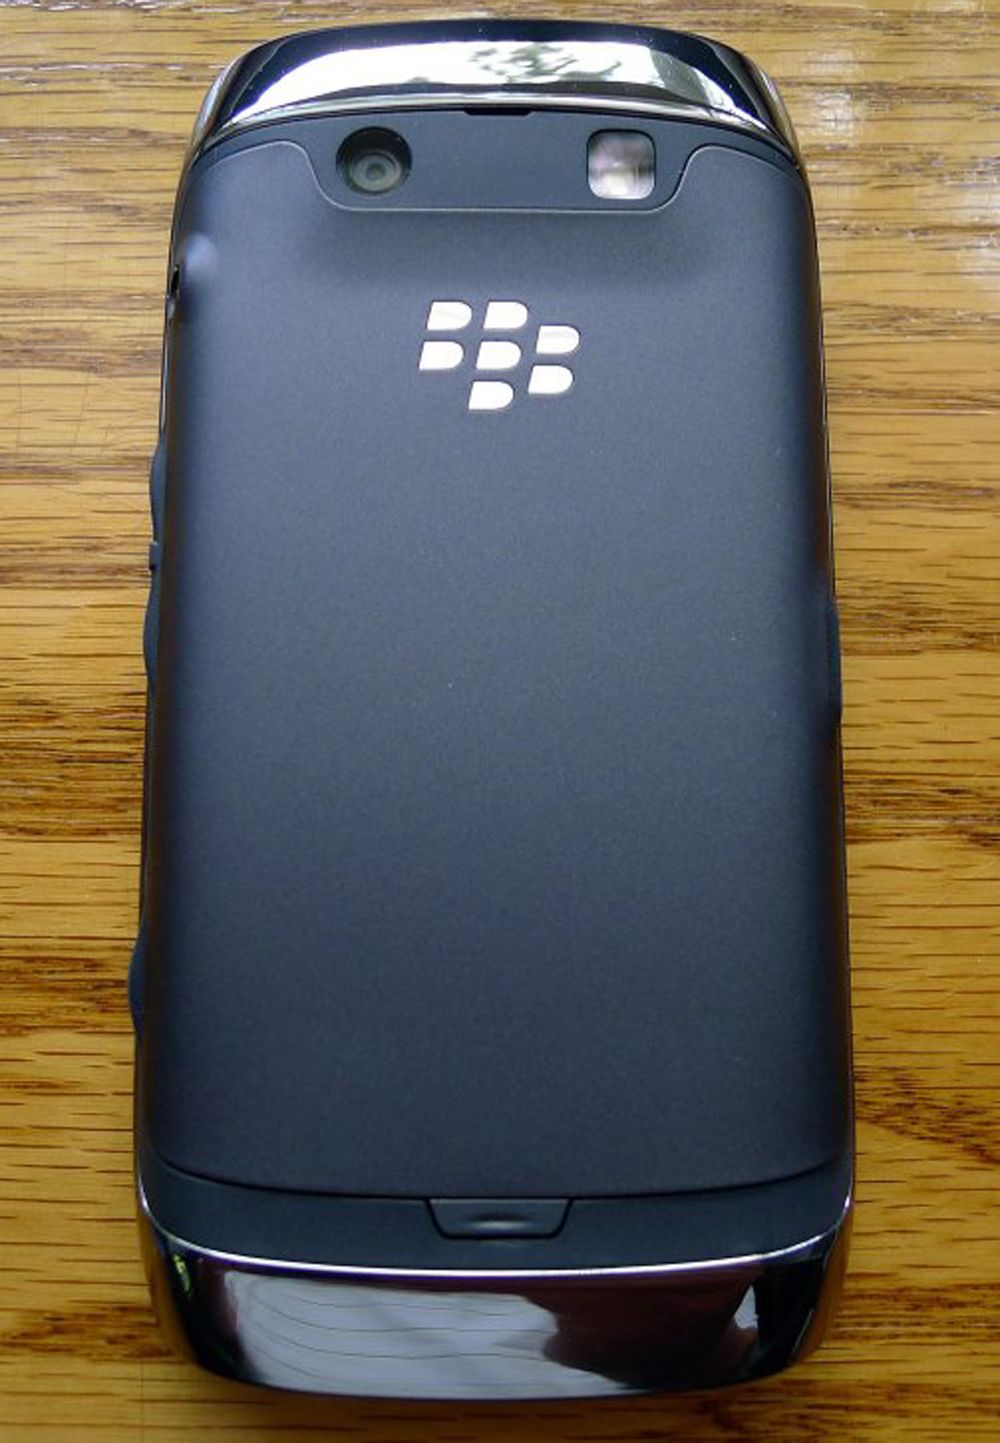 blackberry handsets due for announcement already leaked image 1